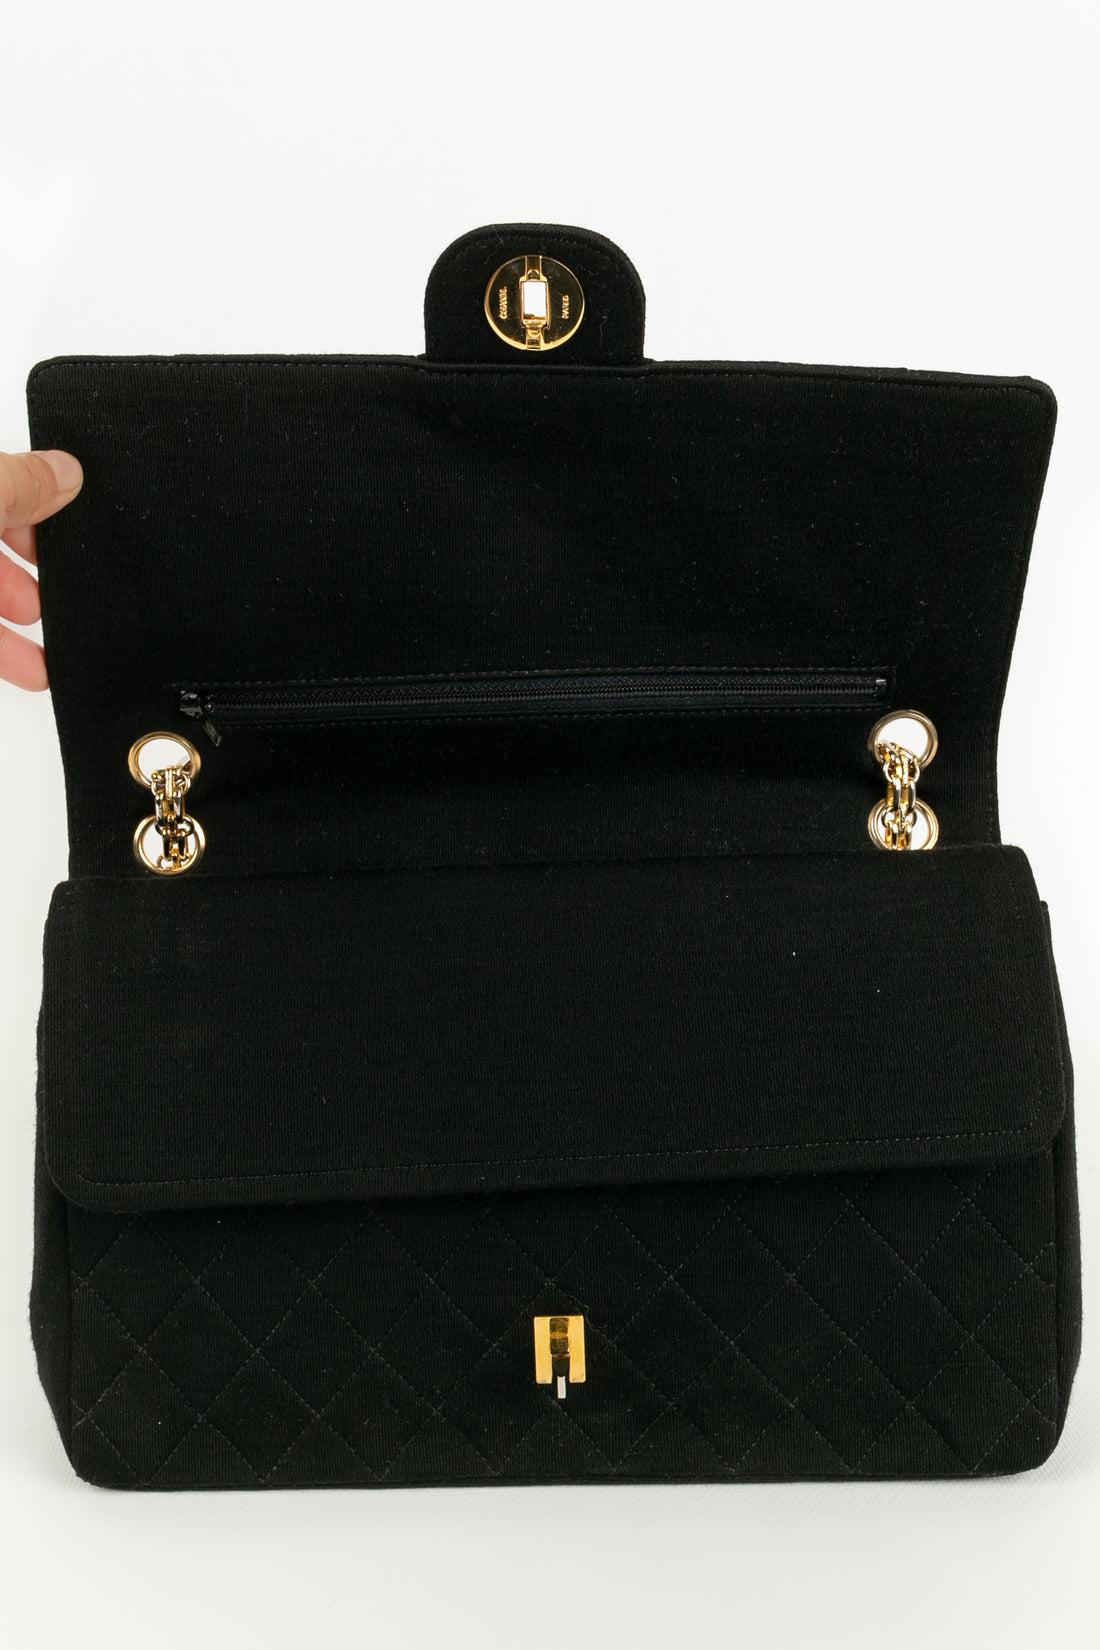 Chanel Black Quilted Jersey Bag For Sale 4